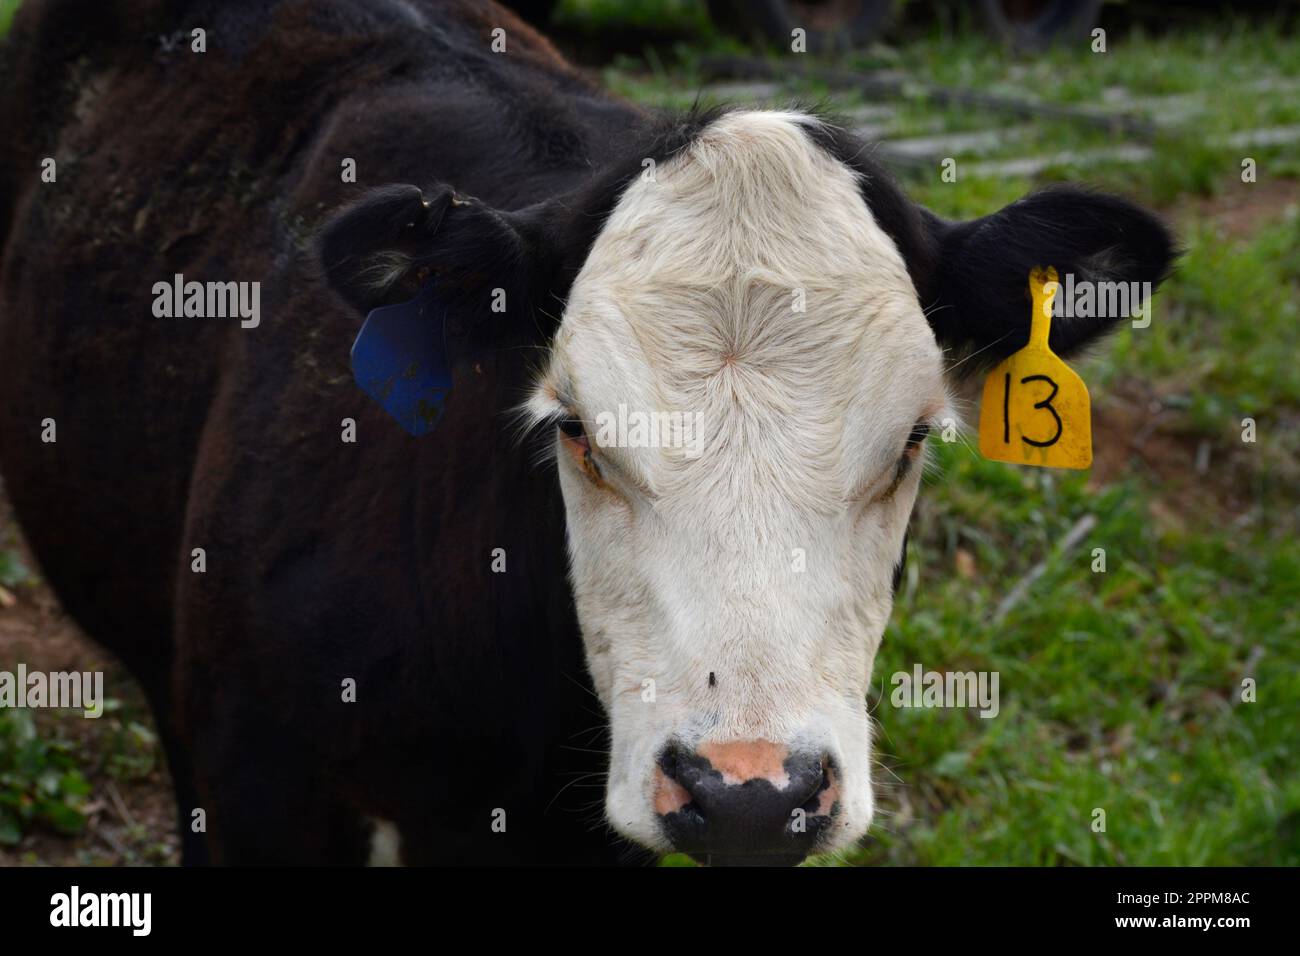 Cattle with identification tags in their ears on a farm in Abingdon,Virginia Stock Photo